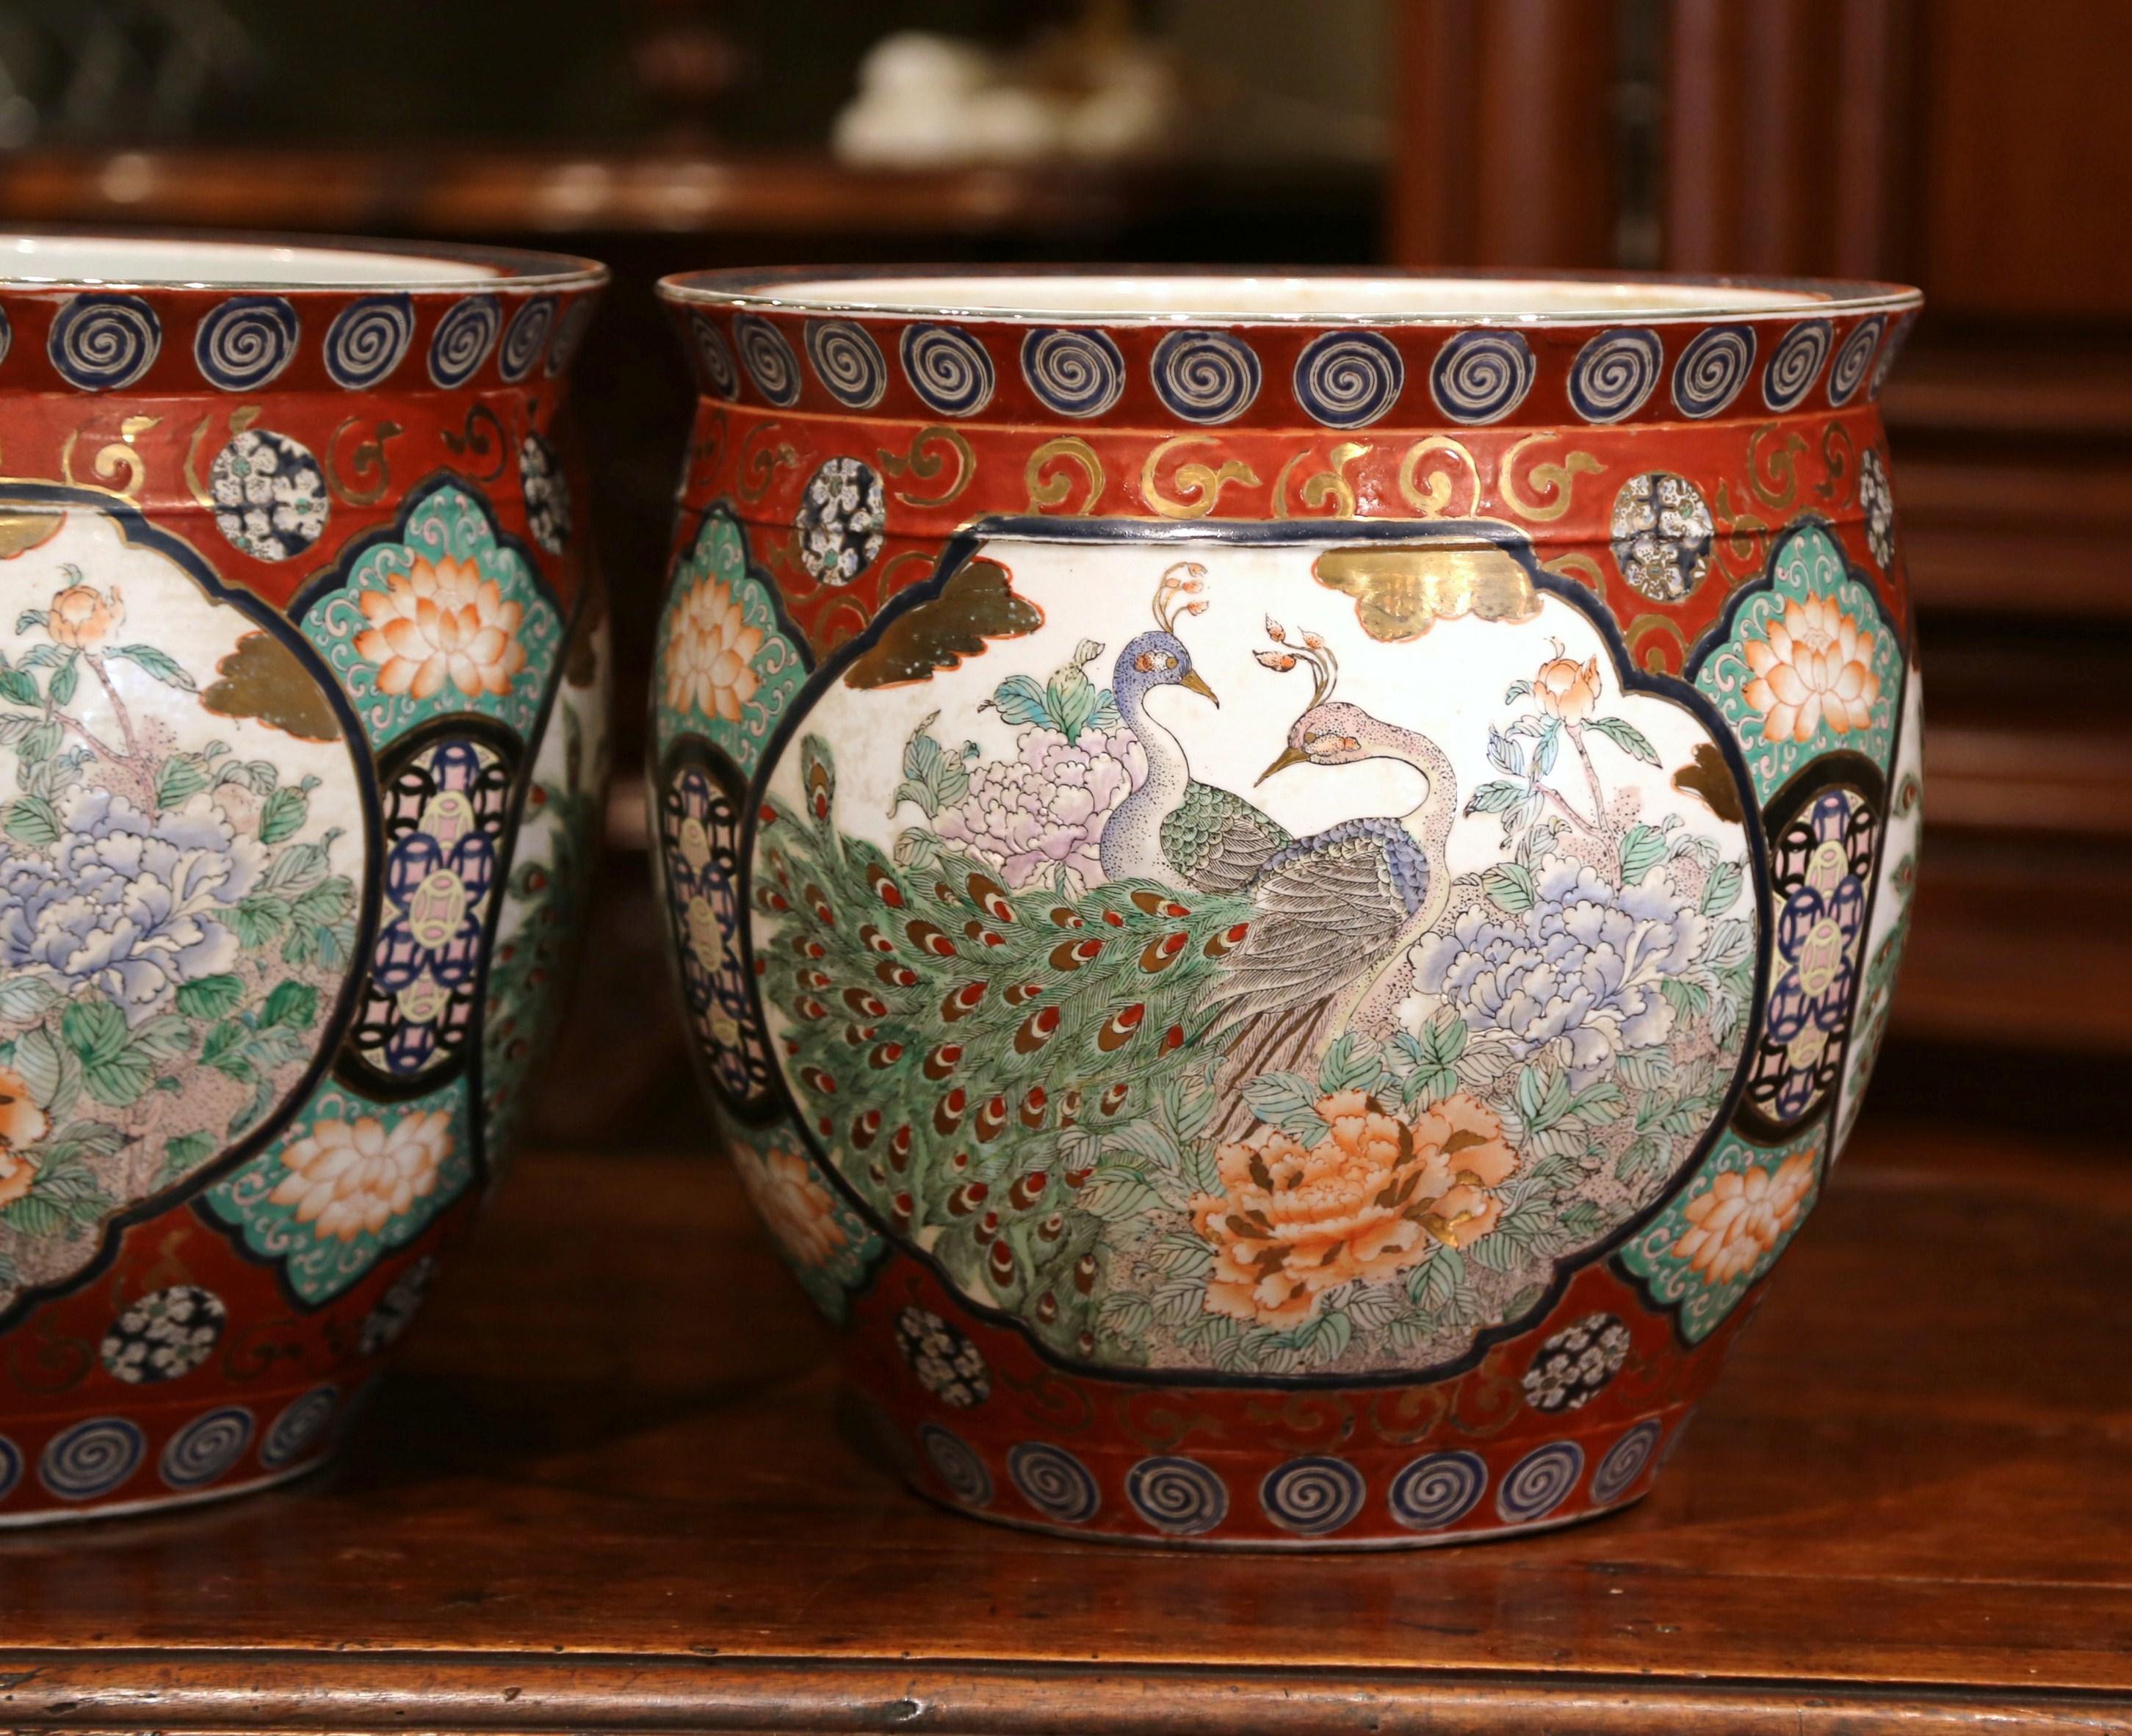 Pair of Early 20th Century Chinese Painted and Gilt Porcelain Planters (Handgefertigt)